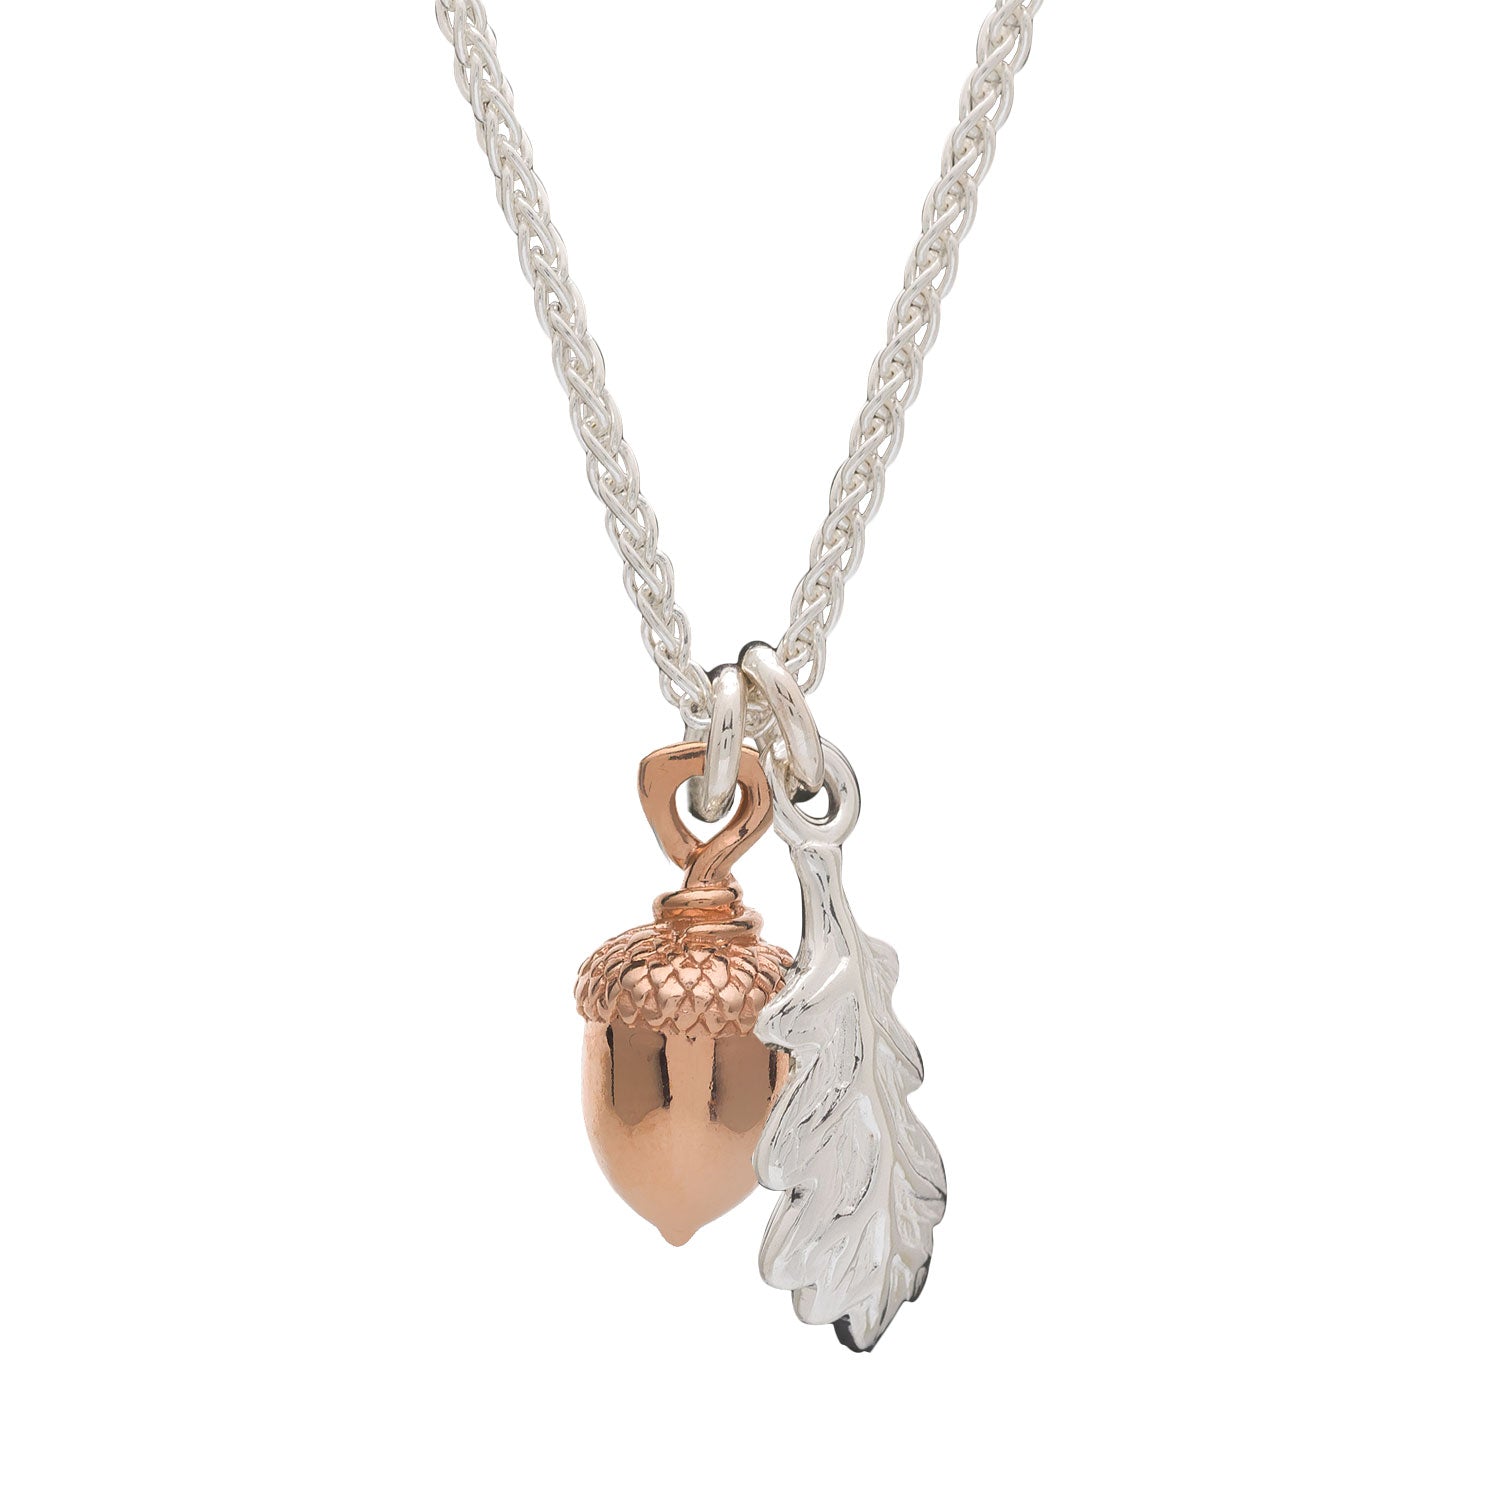 Silver and rose gold acorn and oak leaf necklace nature jewelry UK Scarlett jewellery